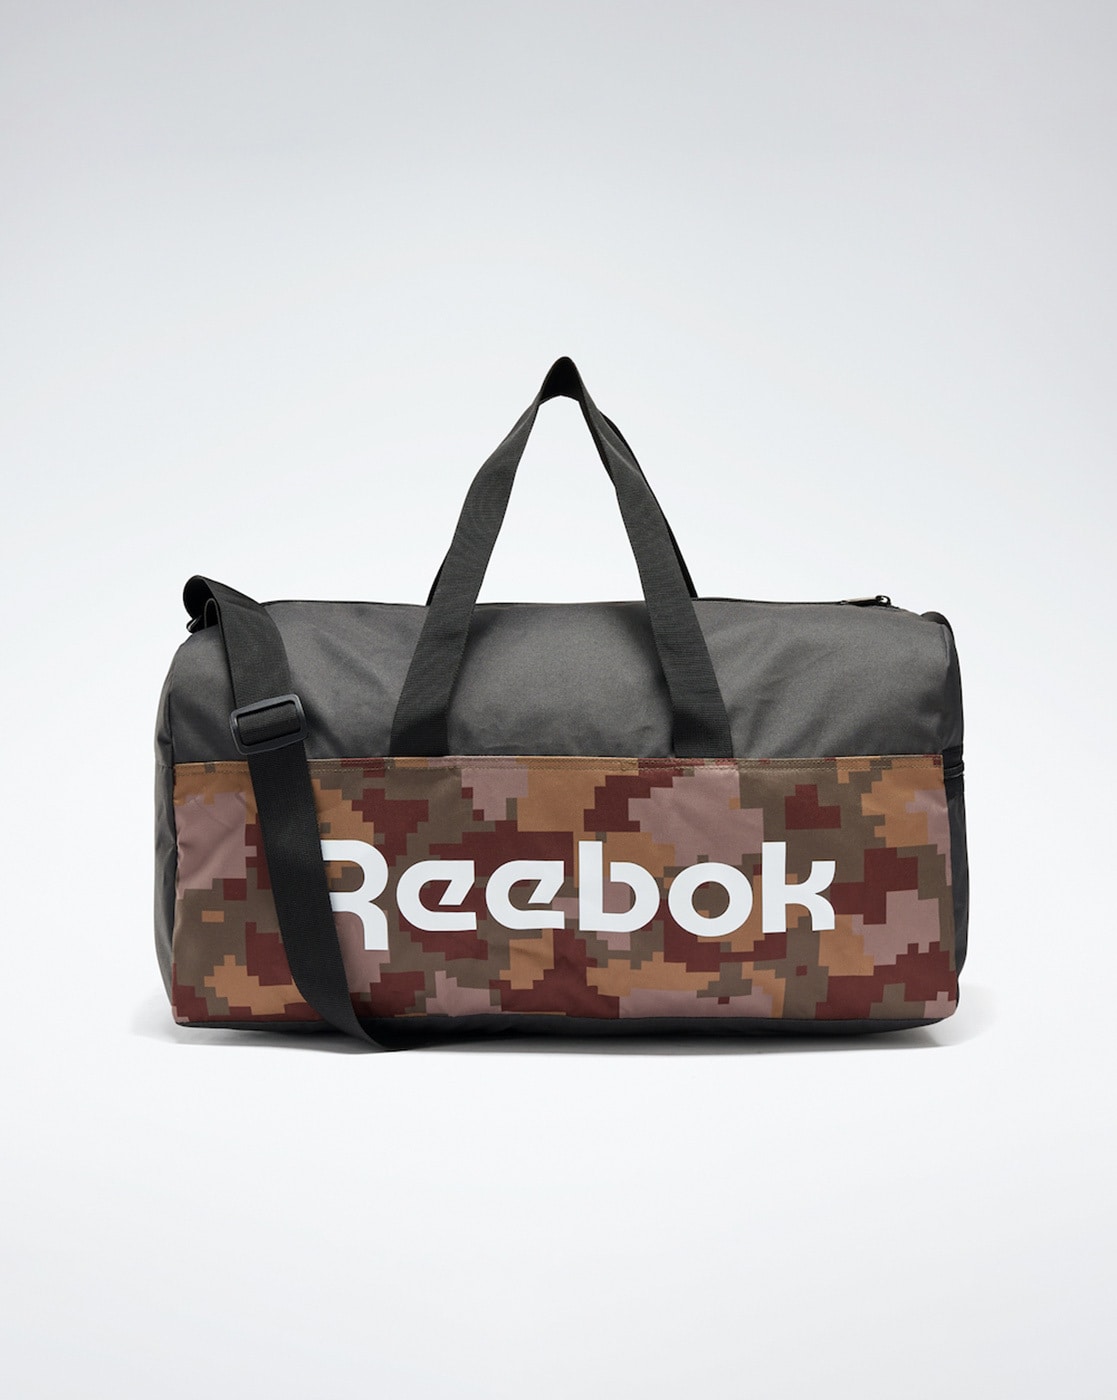 Reebok 24-7 Small Duffle Bag, Red : Amazon.in: Bags, Wallets and Luggage